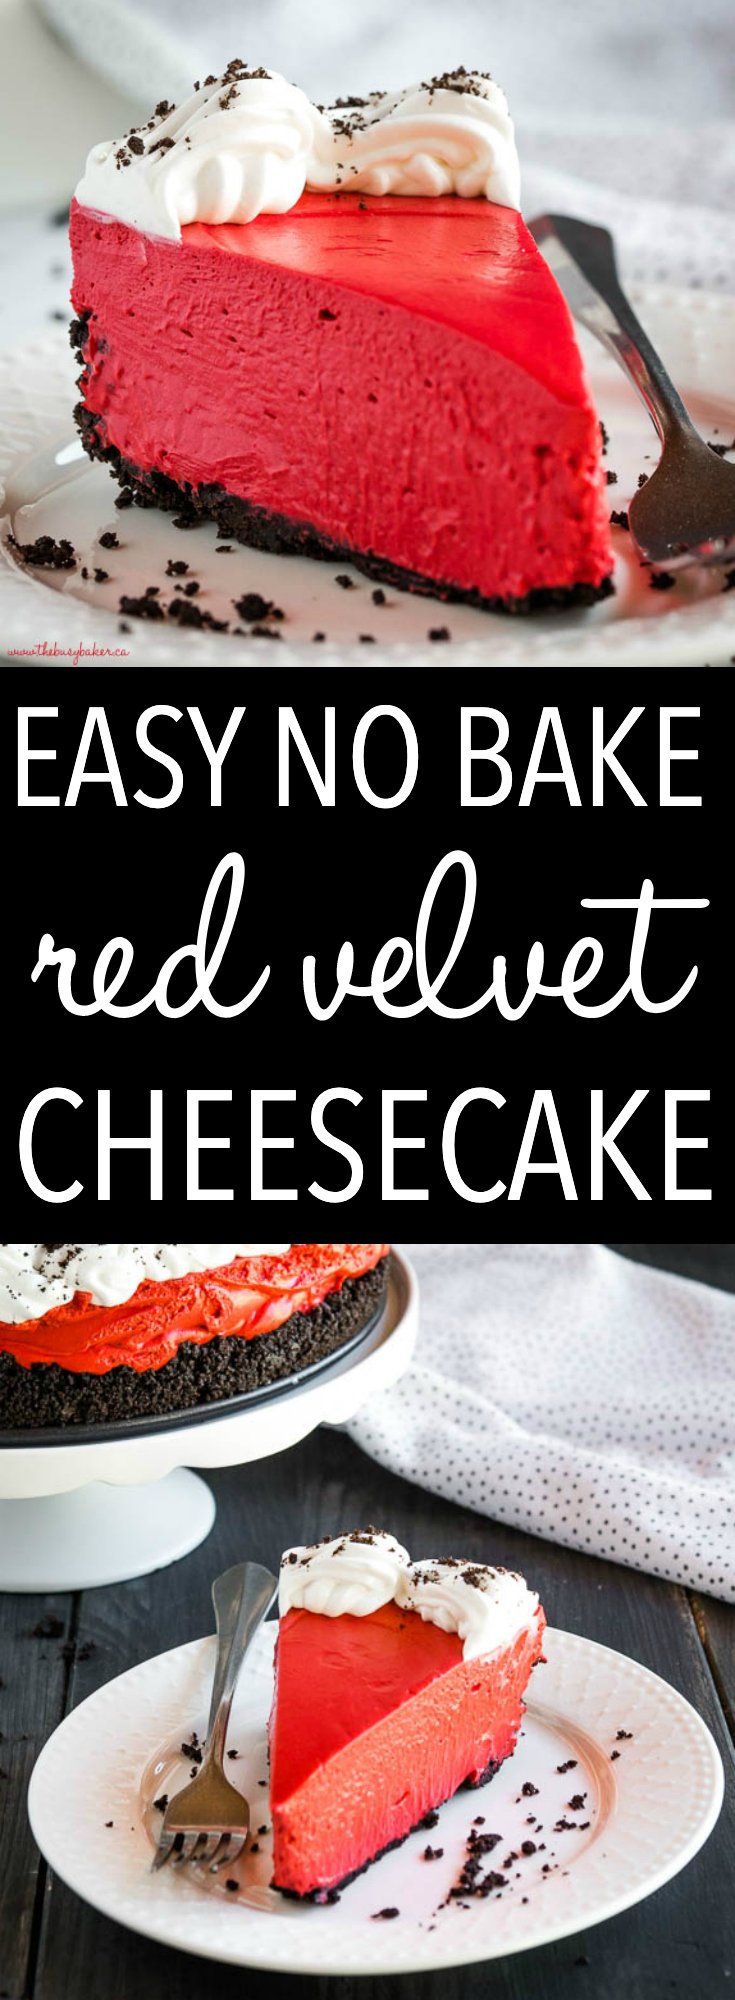 This Red Velvet Cheesecake is the perfect simple dessert for Valentine's Day! It's creamy and smooth with a hint of chocolate and that classic Red Velvet flavour! Recipe from thebusybaker.ca! #redvelvet #cheesecake #cake #dessert #sweet #homemade #classicrecipe #recipe #easyrecipe #creamy via @busybakerblog